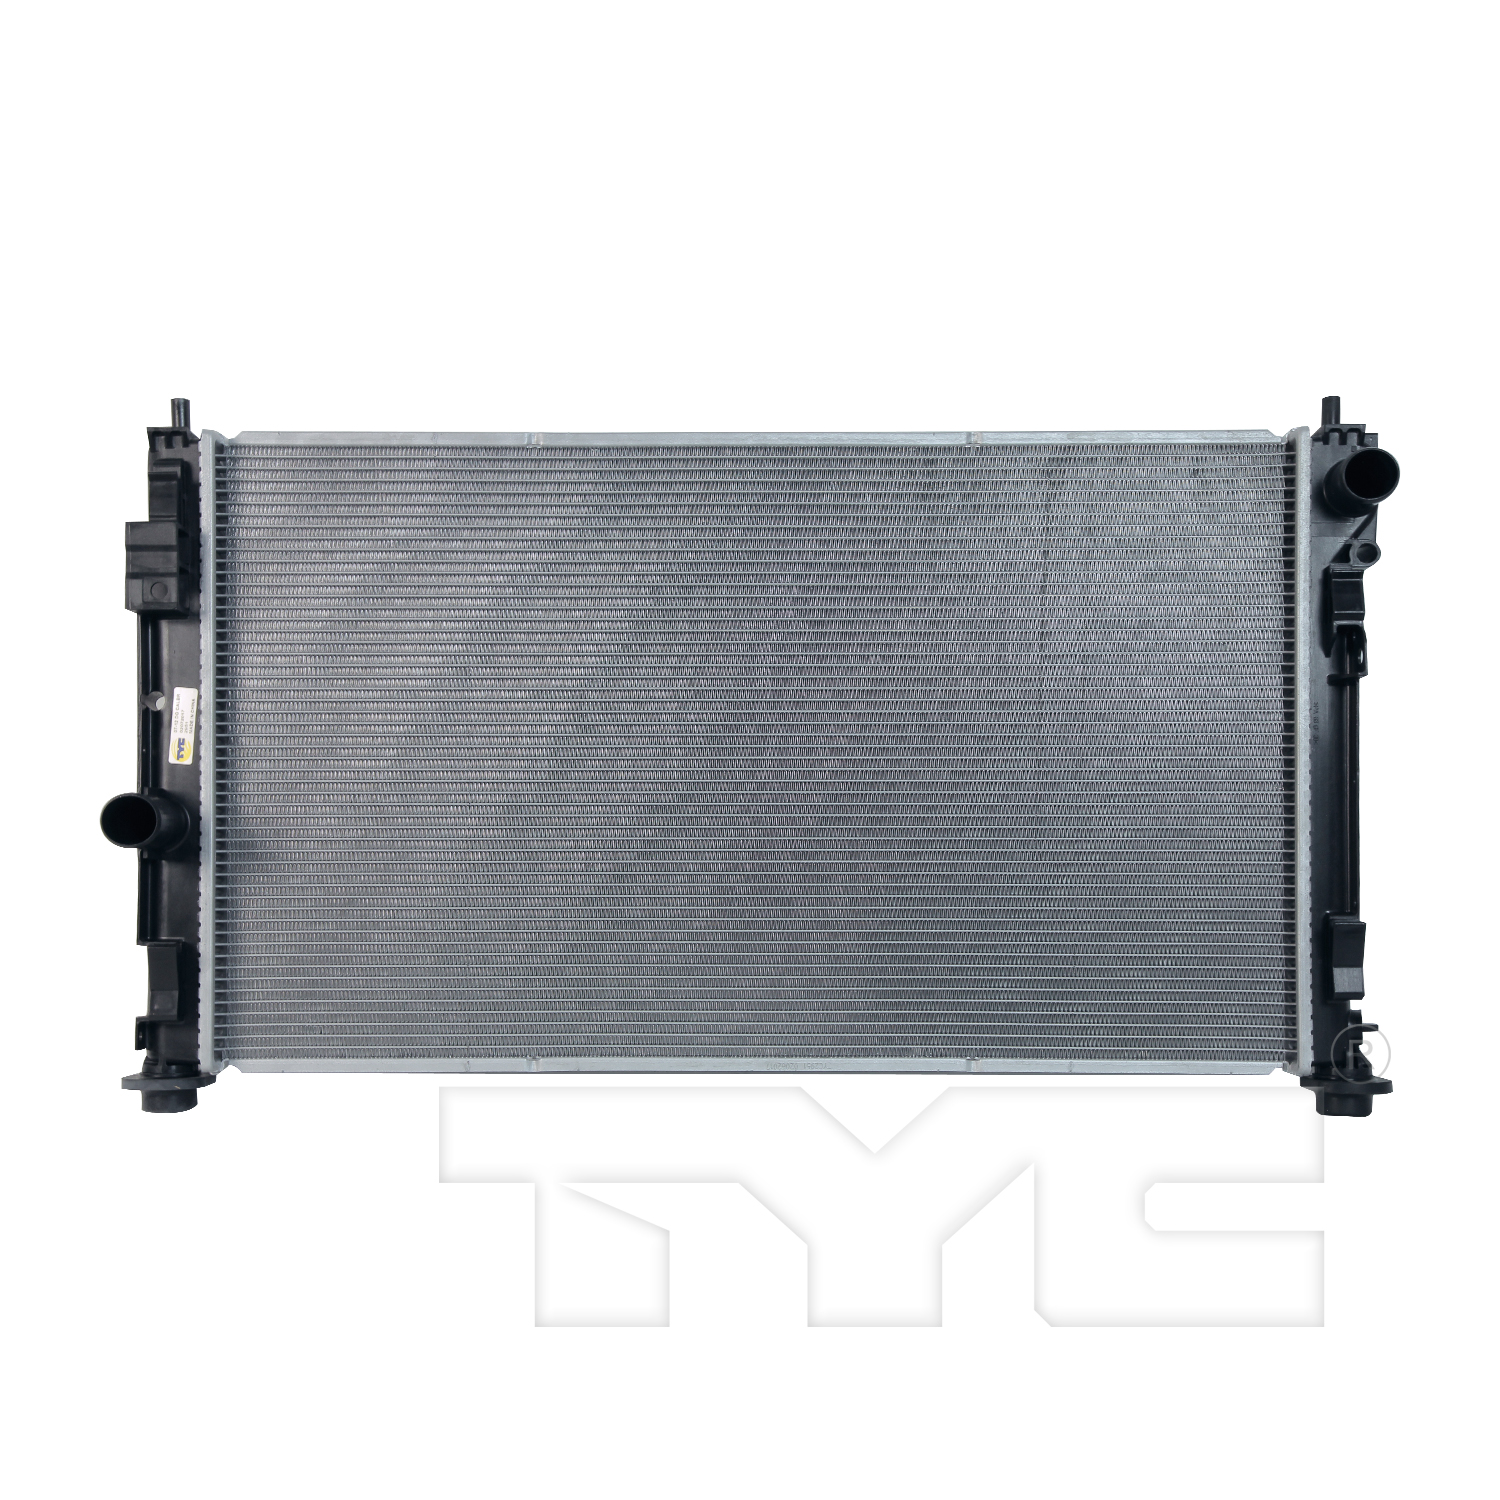 Aftermarket RADIATORS for JEEP - COMPASS, COMPASS,07-10,Radiator assembly